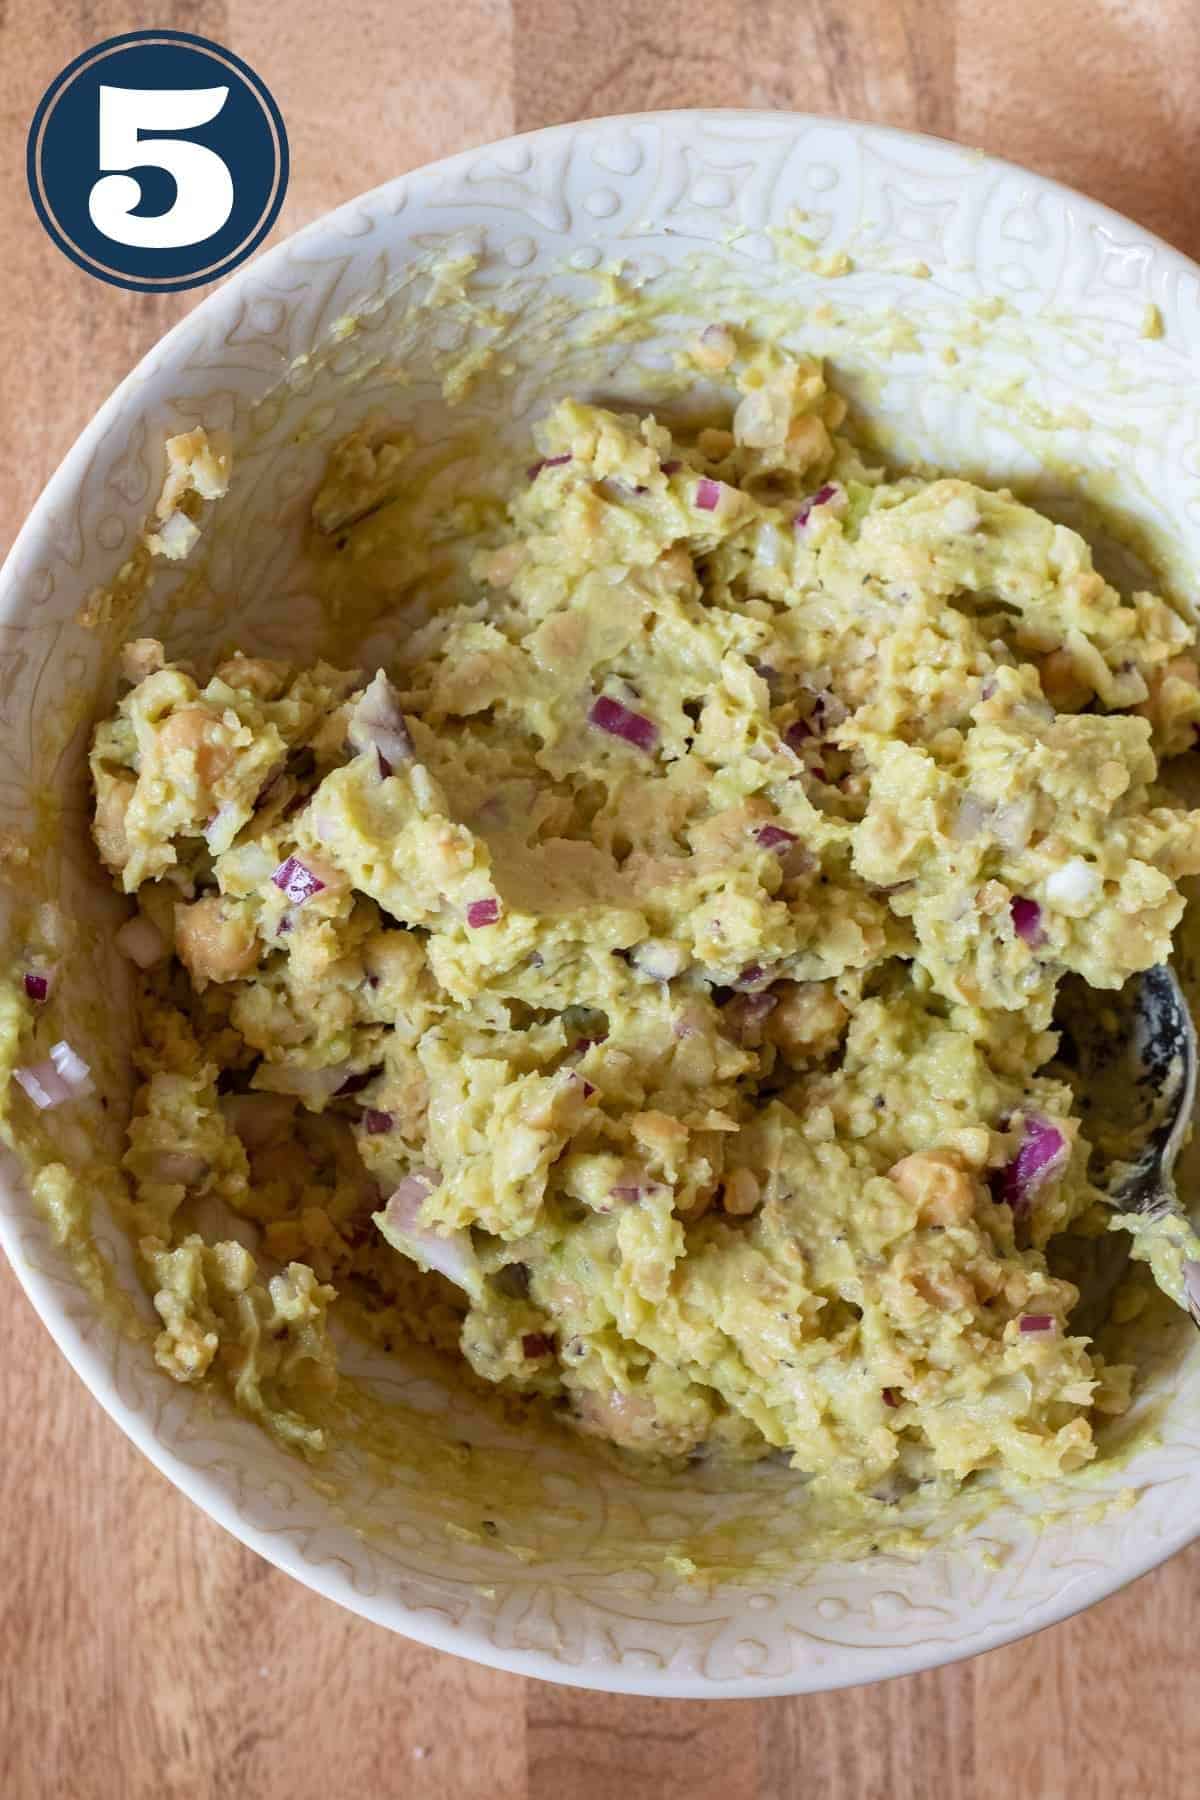 Mashed avocado mixed with mashed chickpeas.